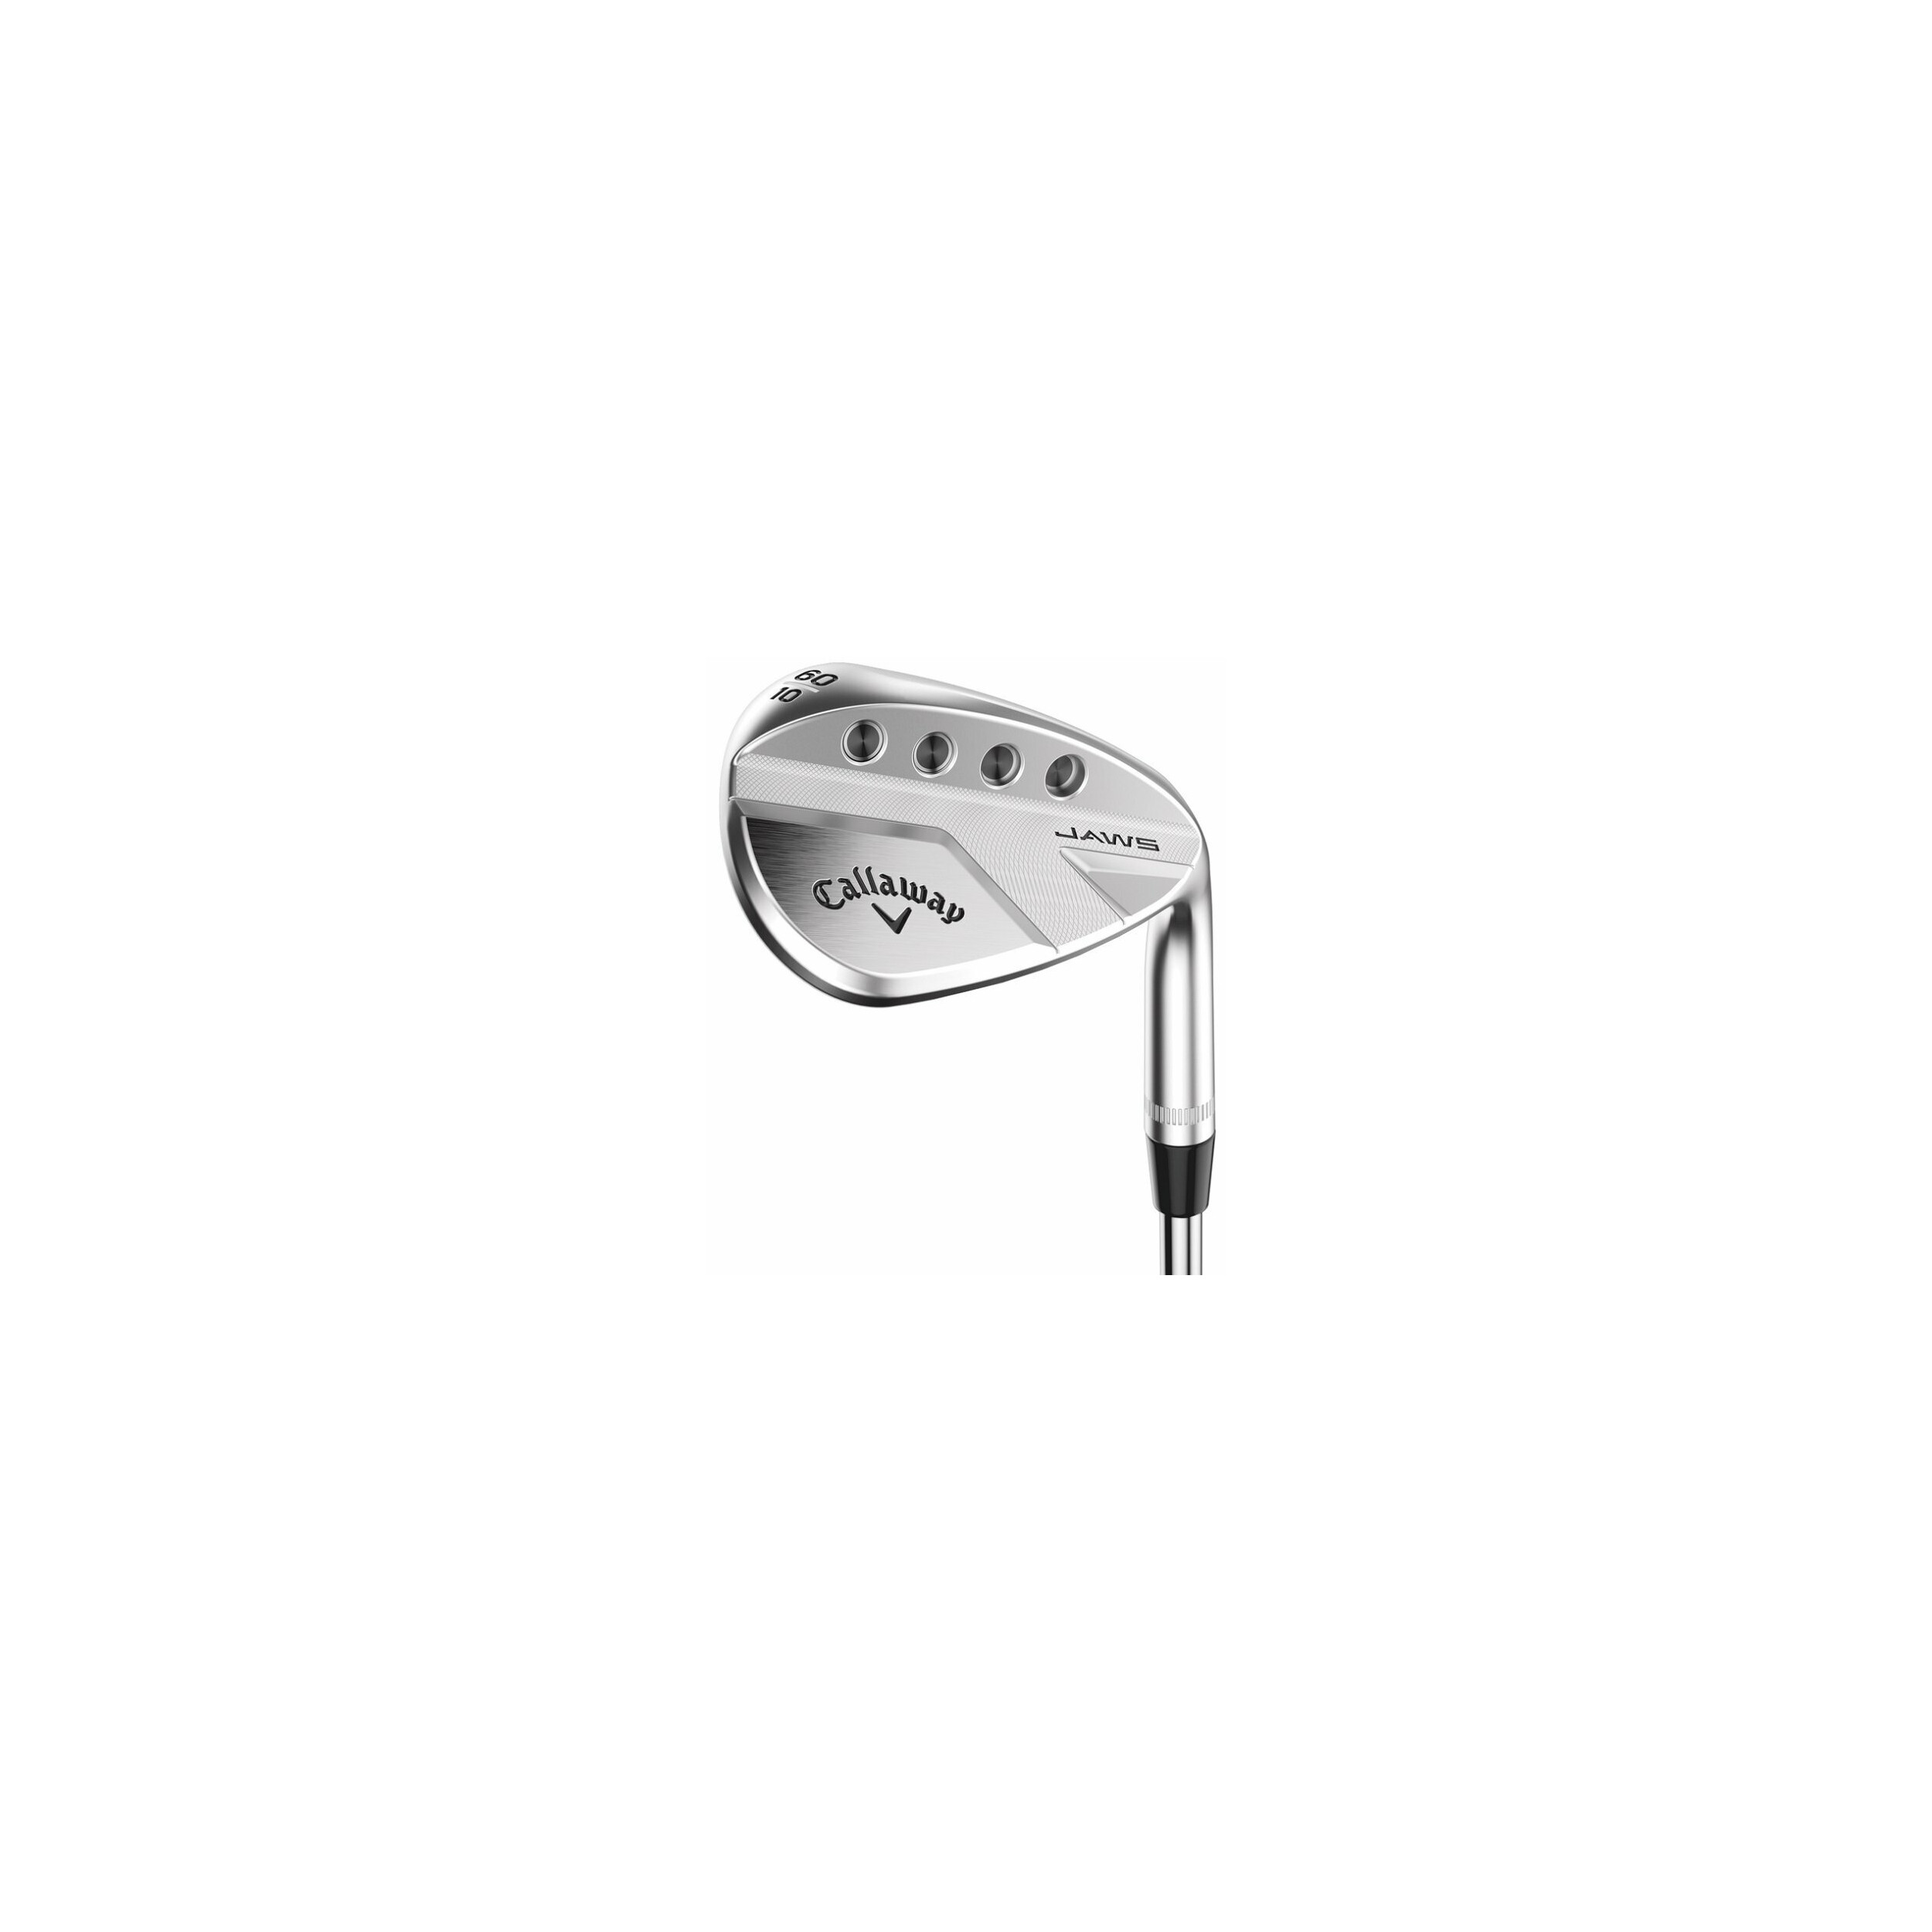 BY WEDGE CALLAWAY BY JAWS FULL TOE GRAPHITE